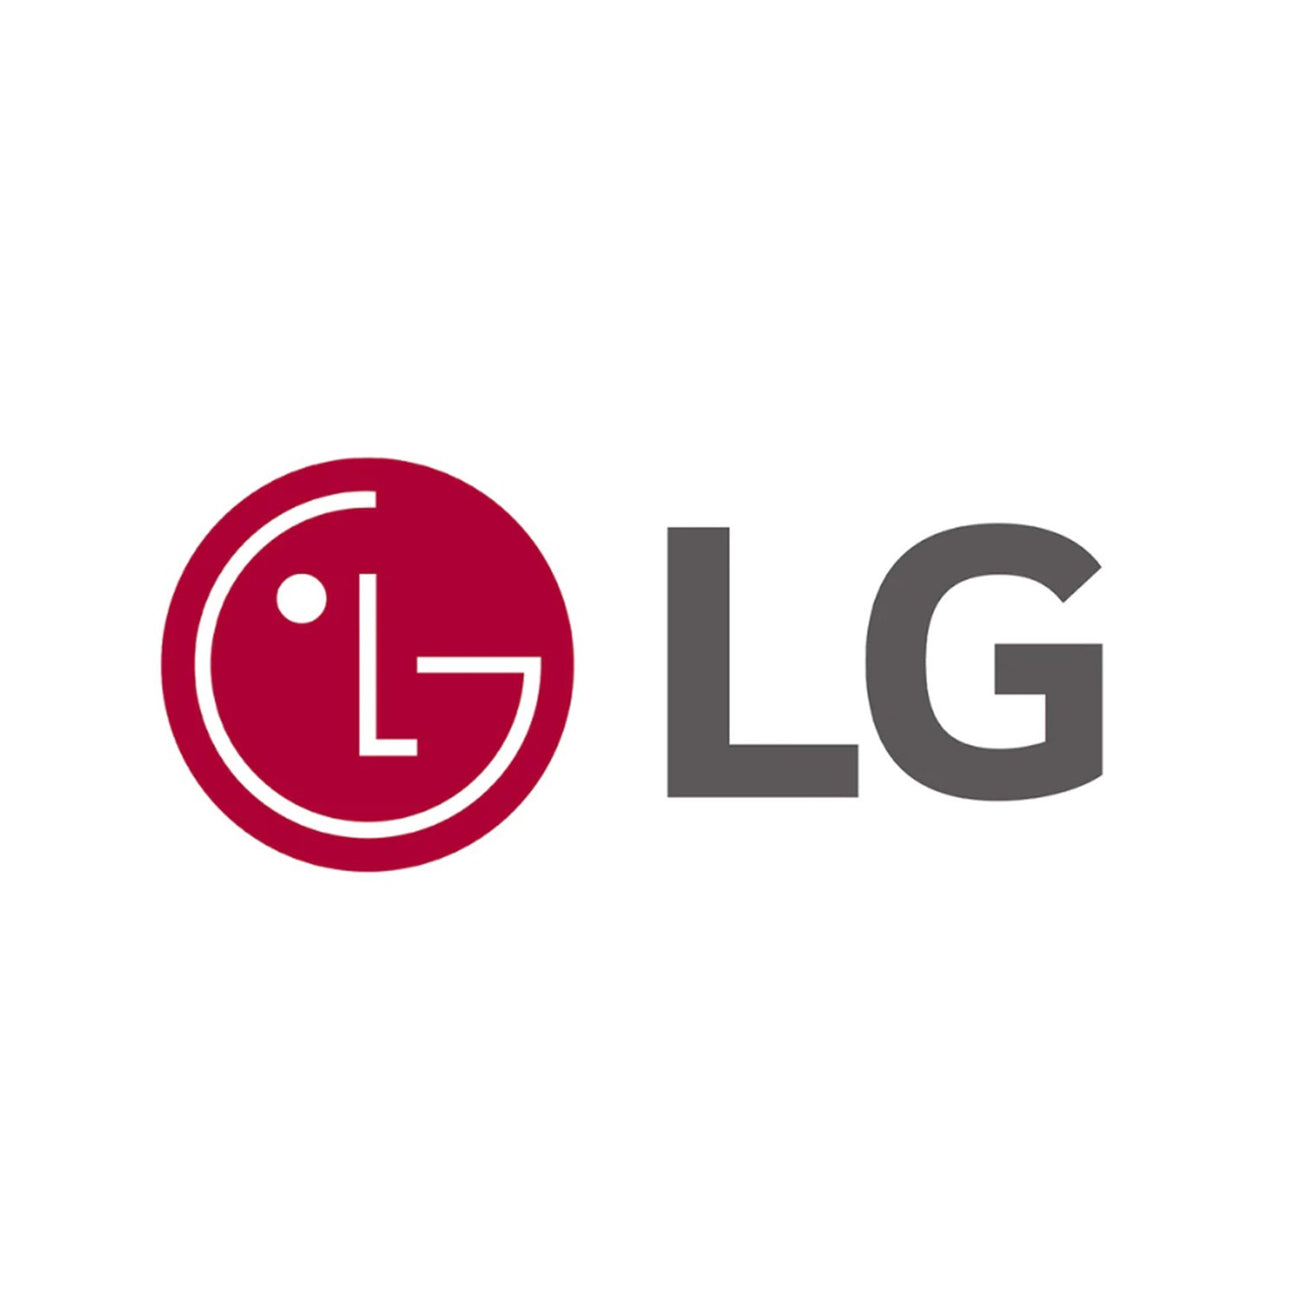 LG Washing Machine Parts - My Oven Spares